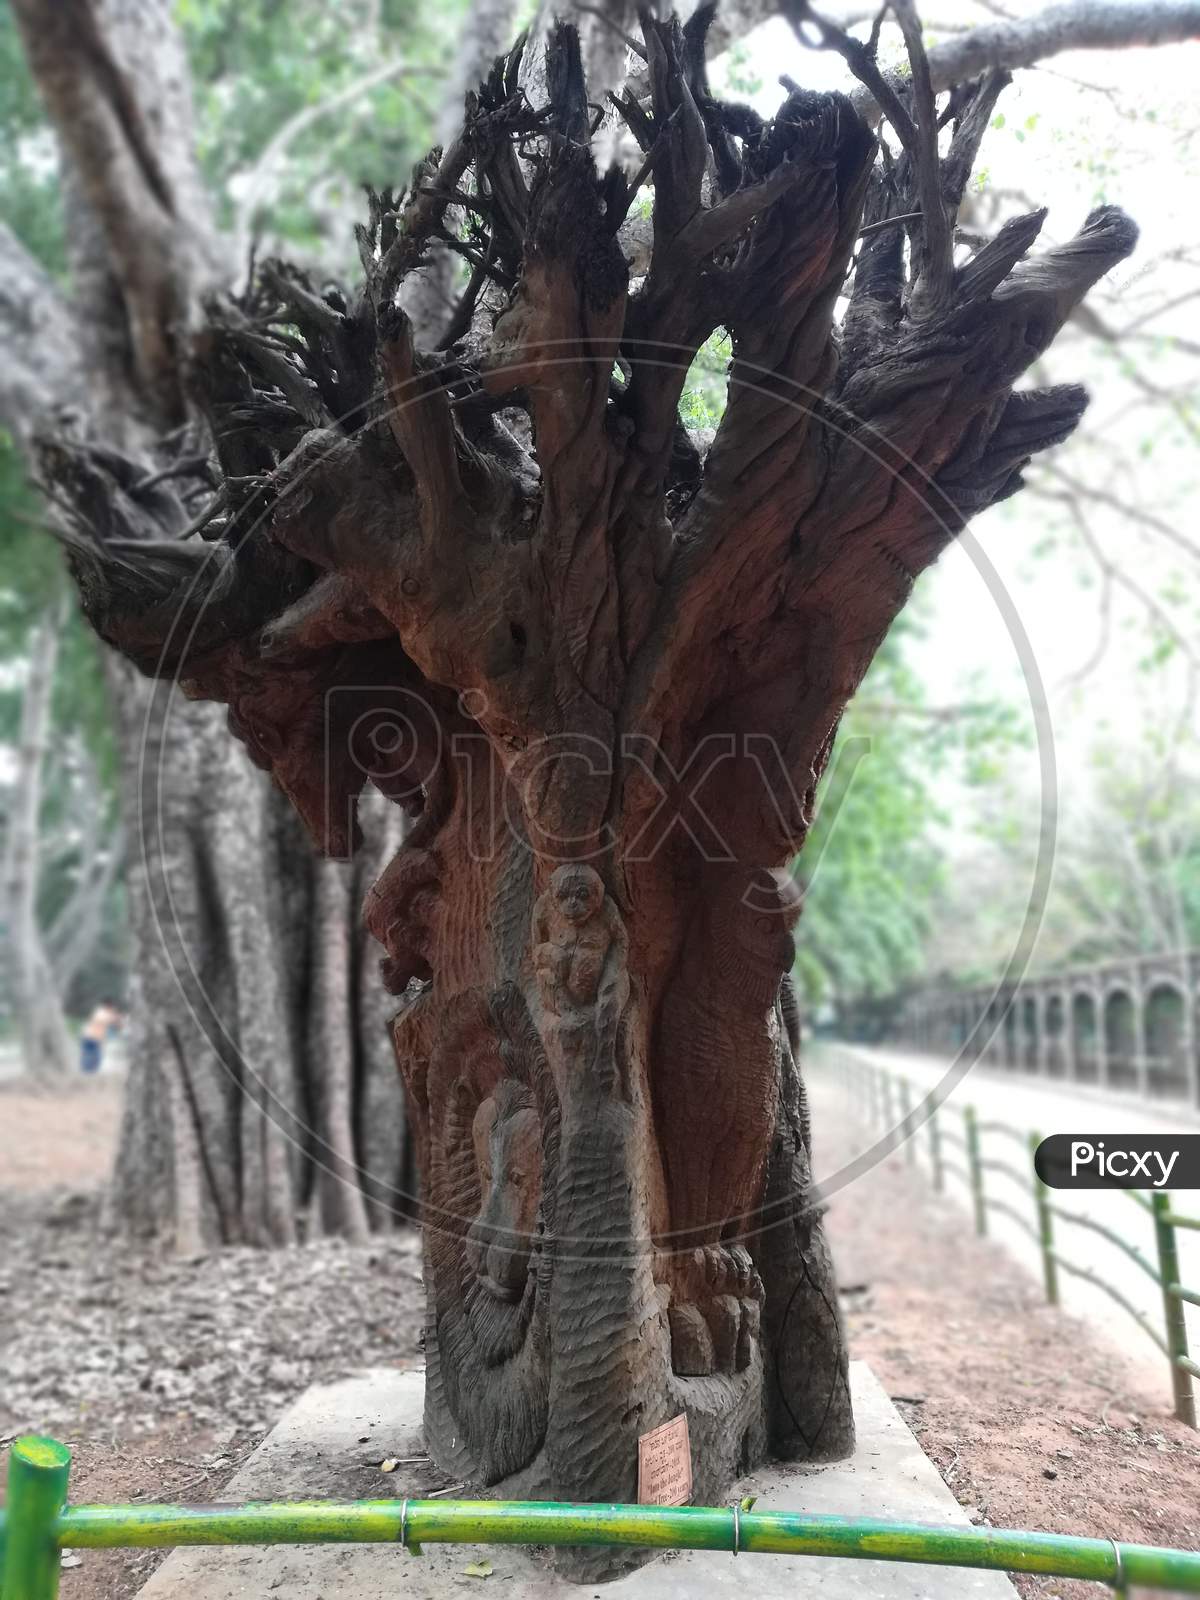 The Art of Tree Sculptures made by Humans, Dead Tree Sculpture